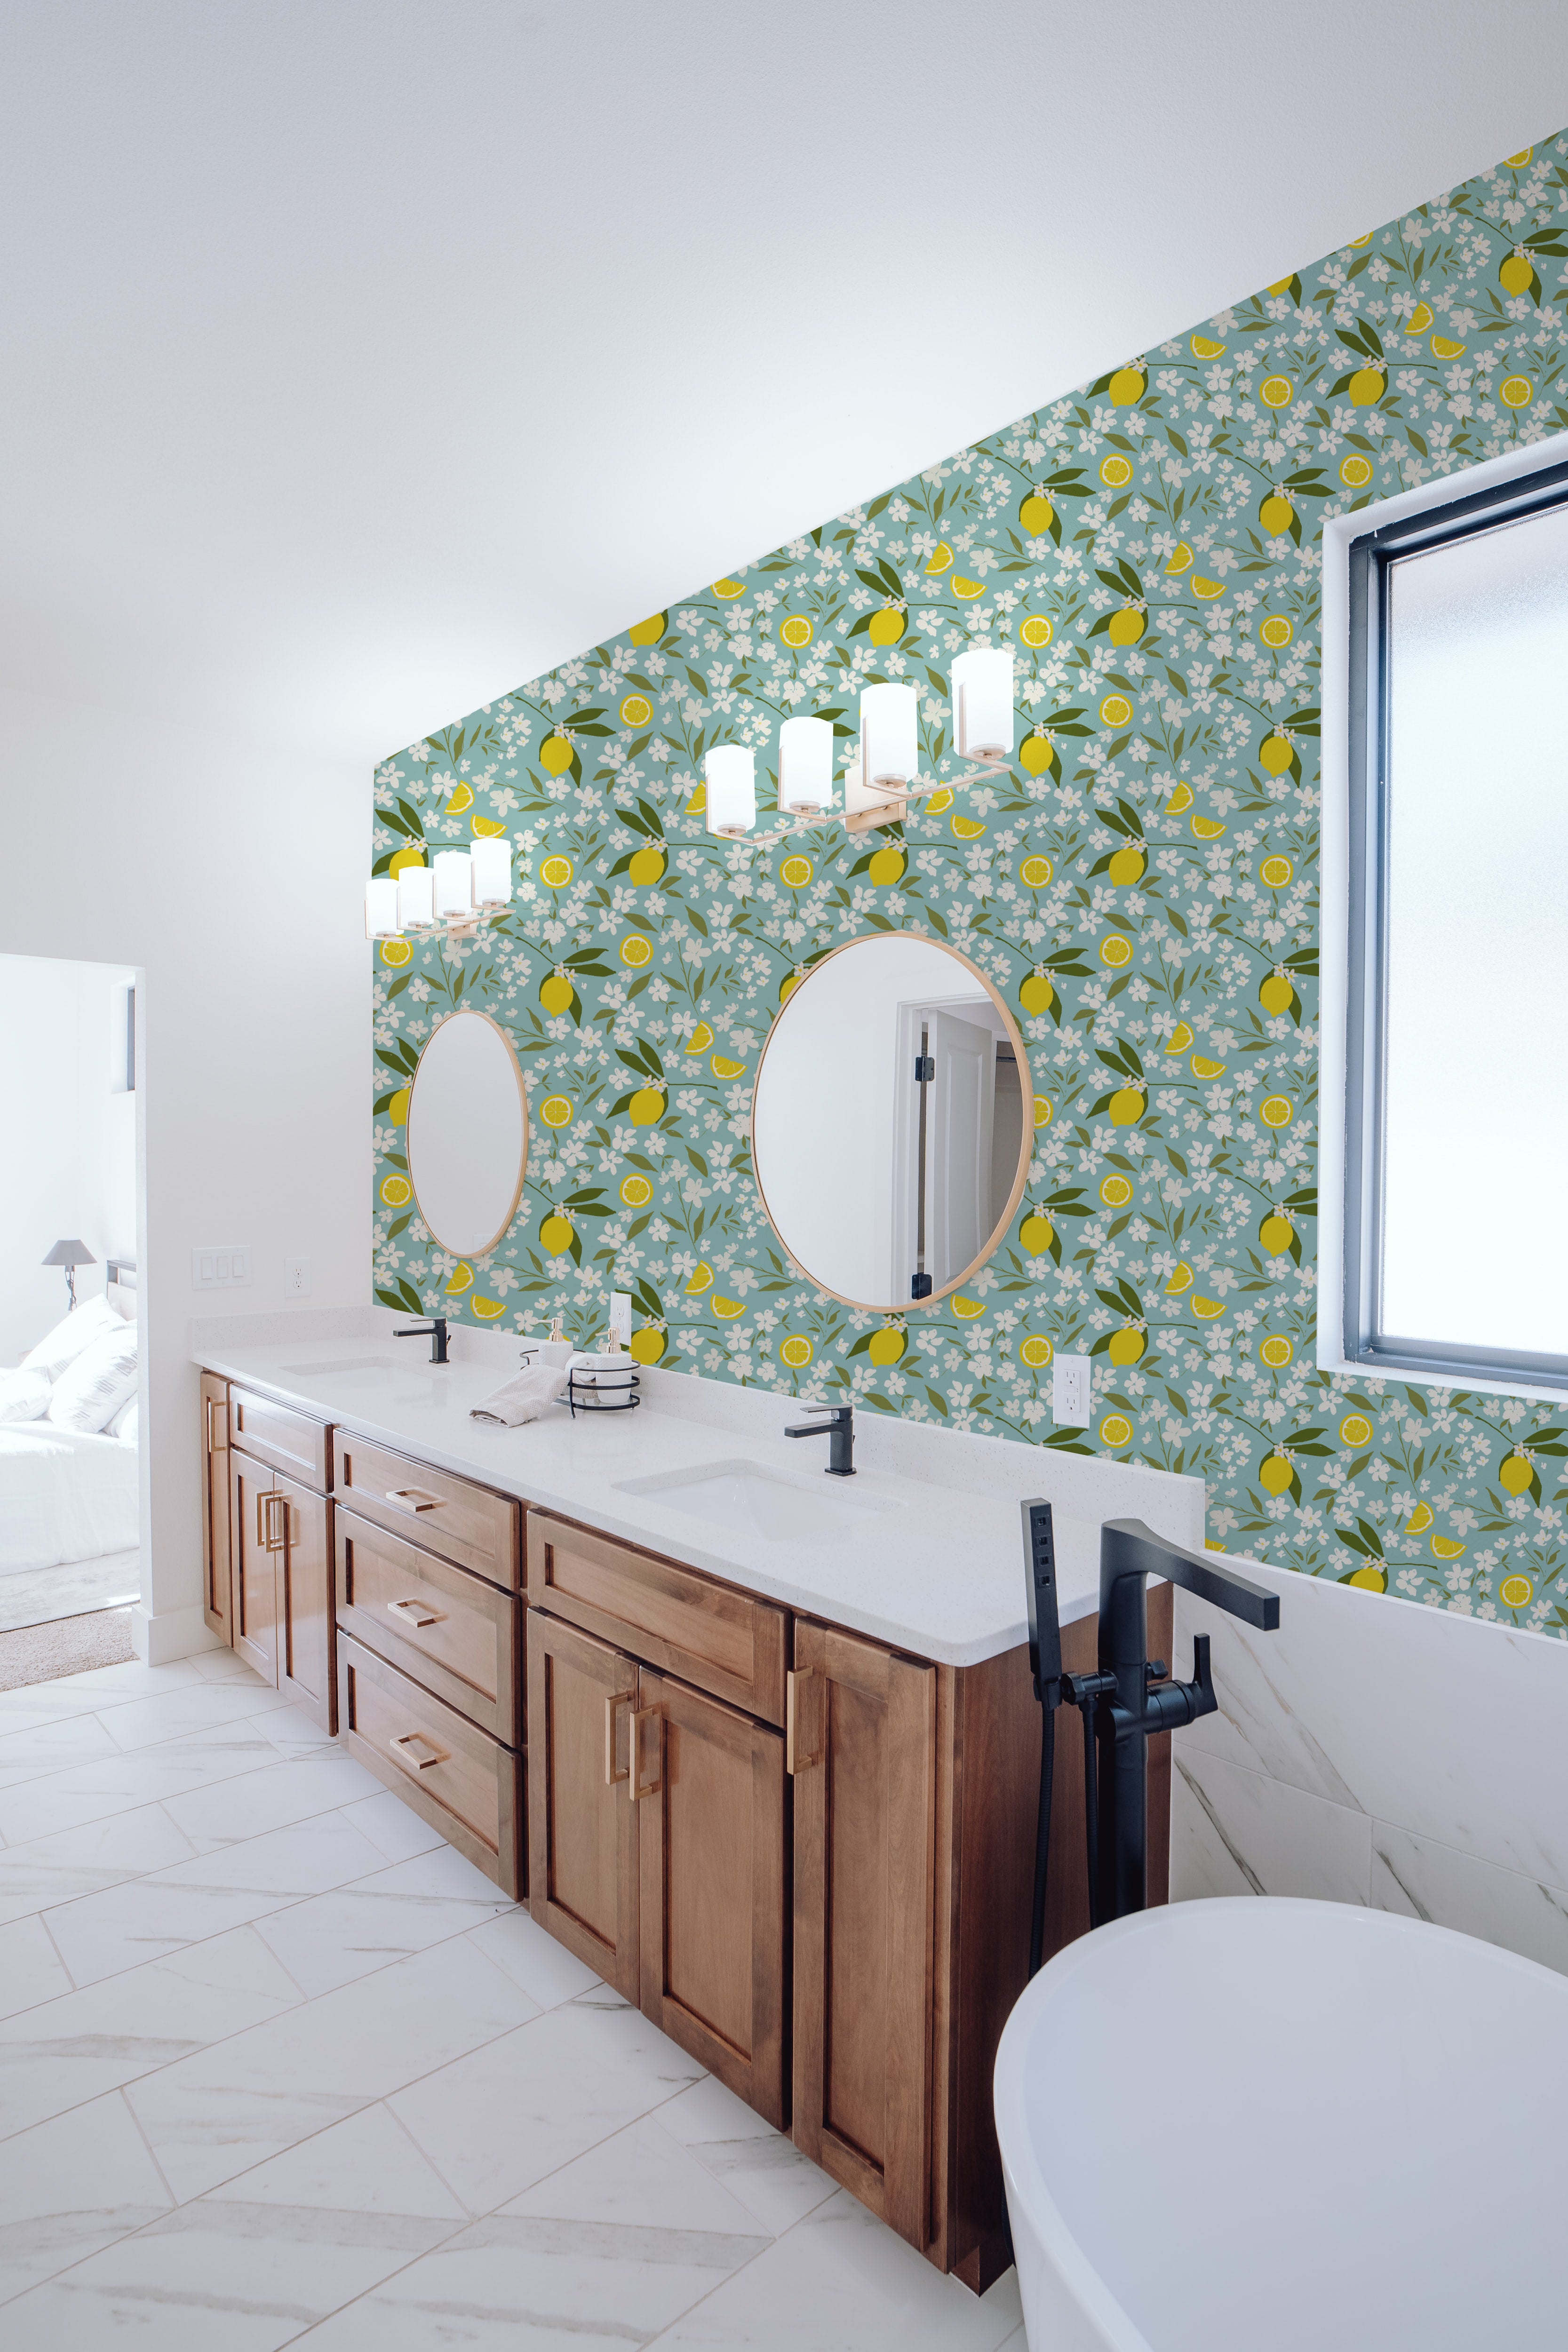 A stylish bathroom featuring Lemon + Jasmine Wallpaper with a light blue background adorned with vibrant lemon and white jasmine flowers. The space includes a white freestanding bathtub, a wooden double-sink vanity, and circular mirrors, creating a fresh and bright atmosphere.